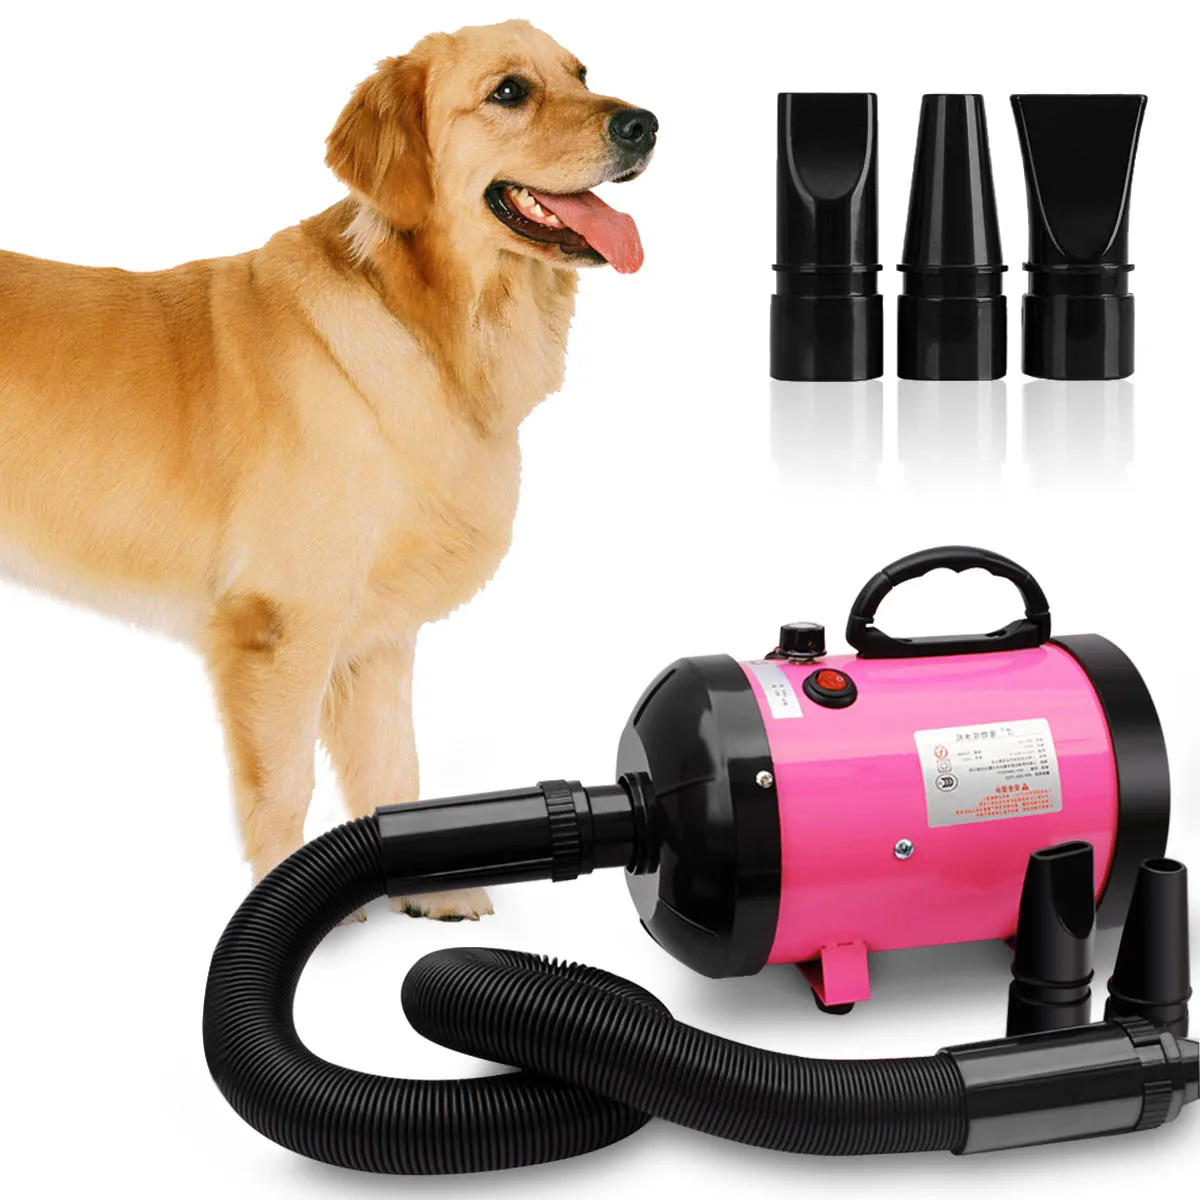 

3 Color 2800W Pet Dryer Blower Adjustable Dog Grooming Dryer Pet Hair Dryer Strong-Power Low Noice Blower with 3 nozzles